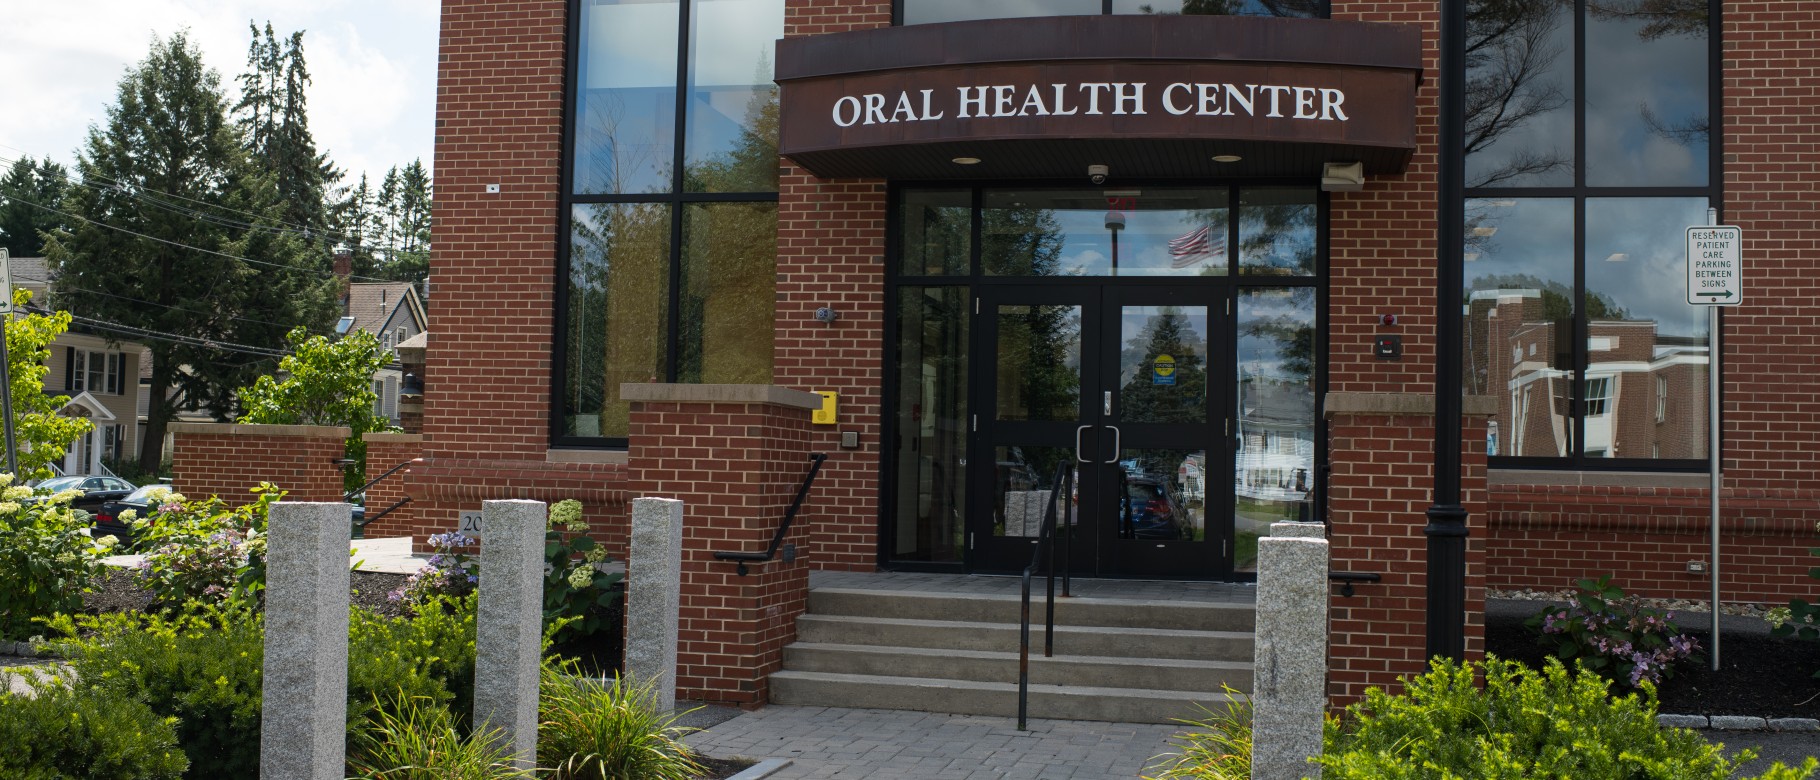 UNE's Oral Health Center is shutdown, except for emergency procedures, because of the coronavirus pandemic